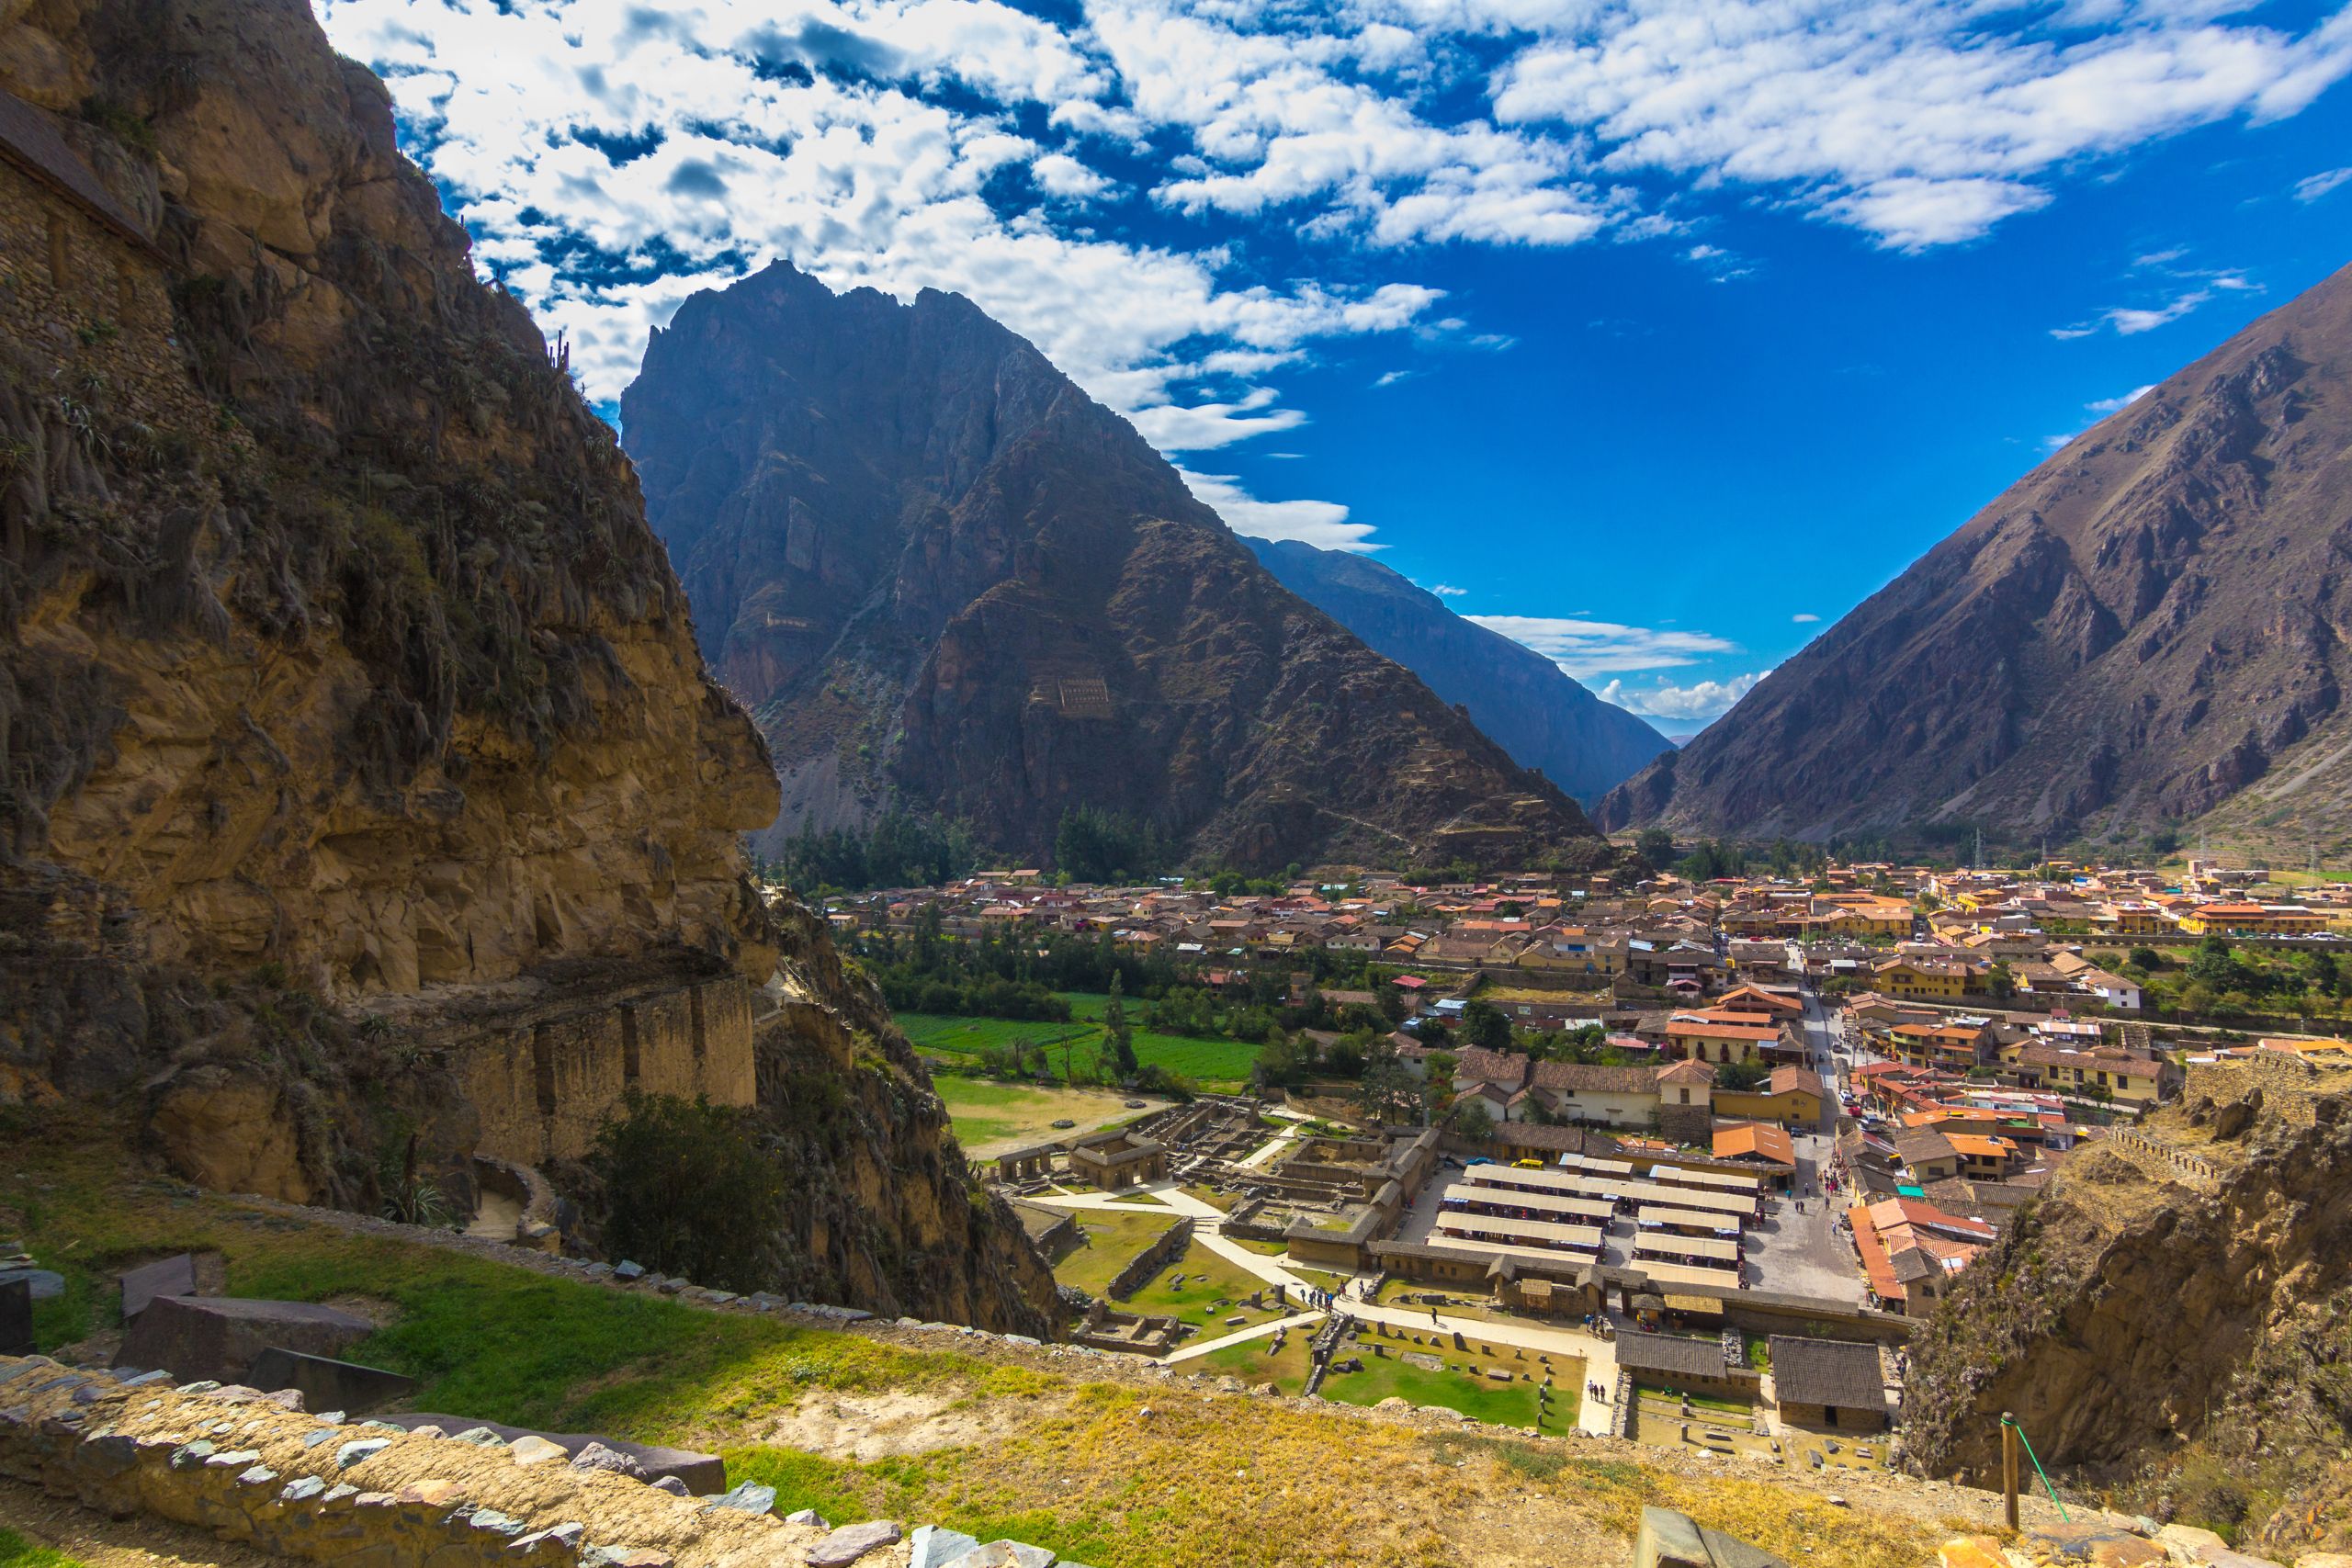 The Mysteries of Ollantaytambo: A Look into Peru’s Incan Past